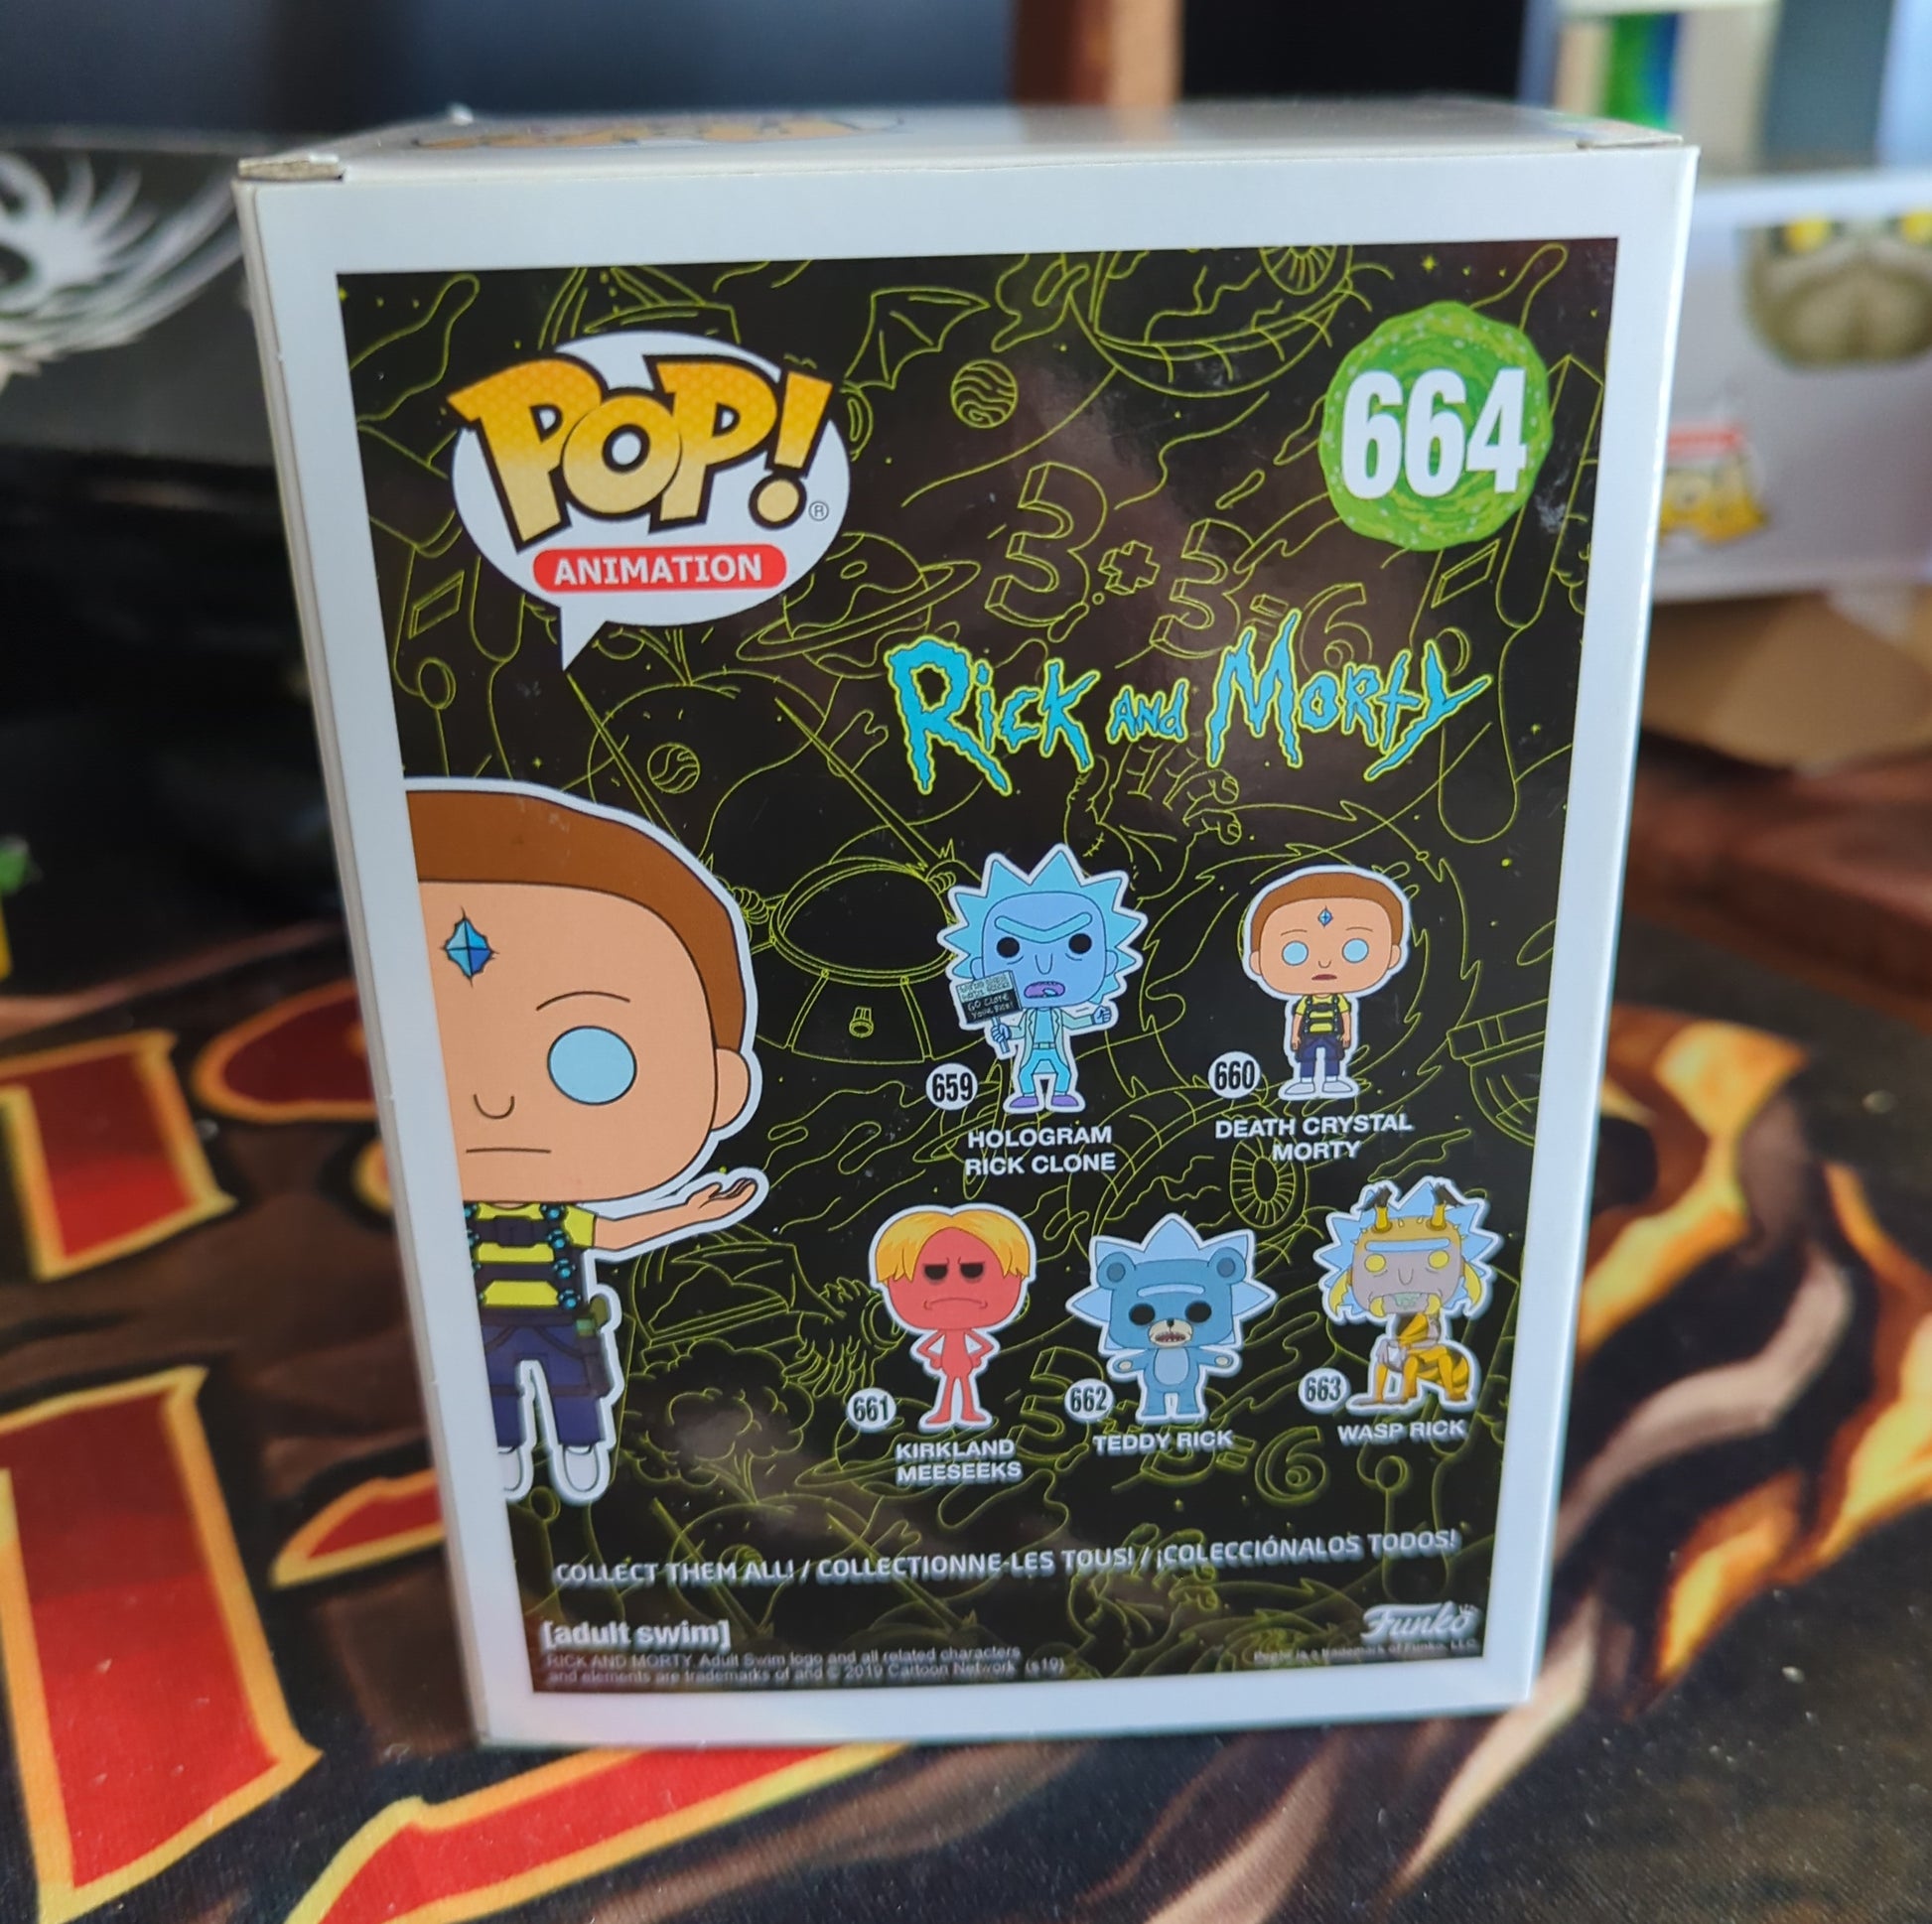 FUNKO POP VINYL - Floating Death Crystal Morty - 664 - Rick and Morty FRENLY BRICKS - Open 7 Days